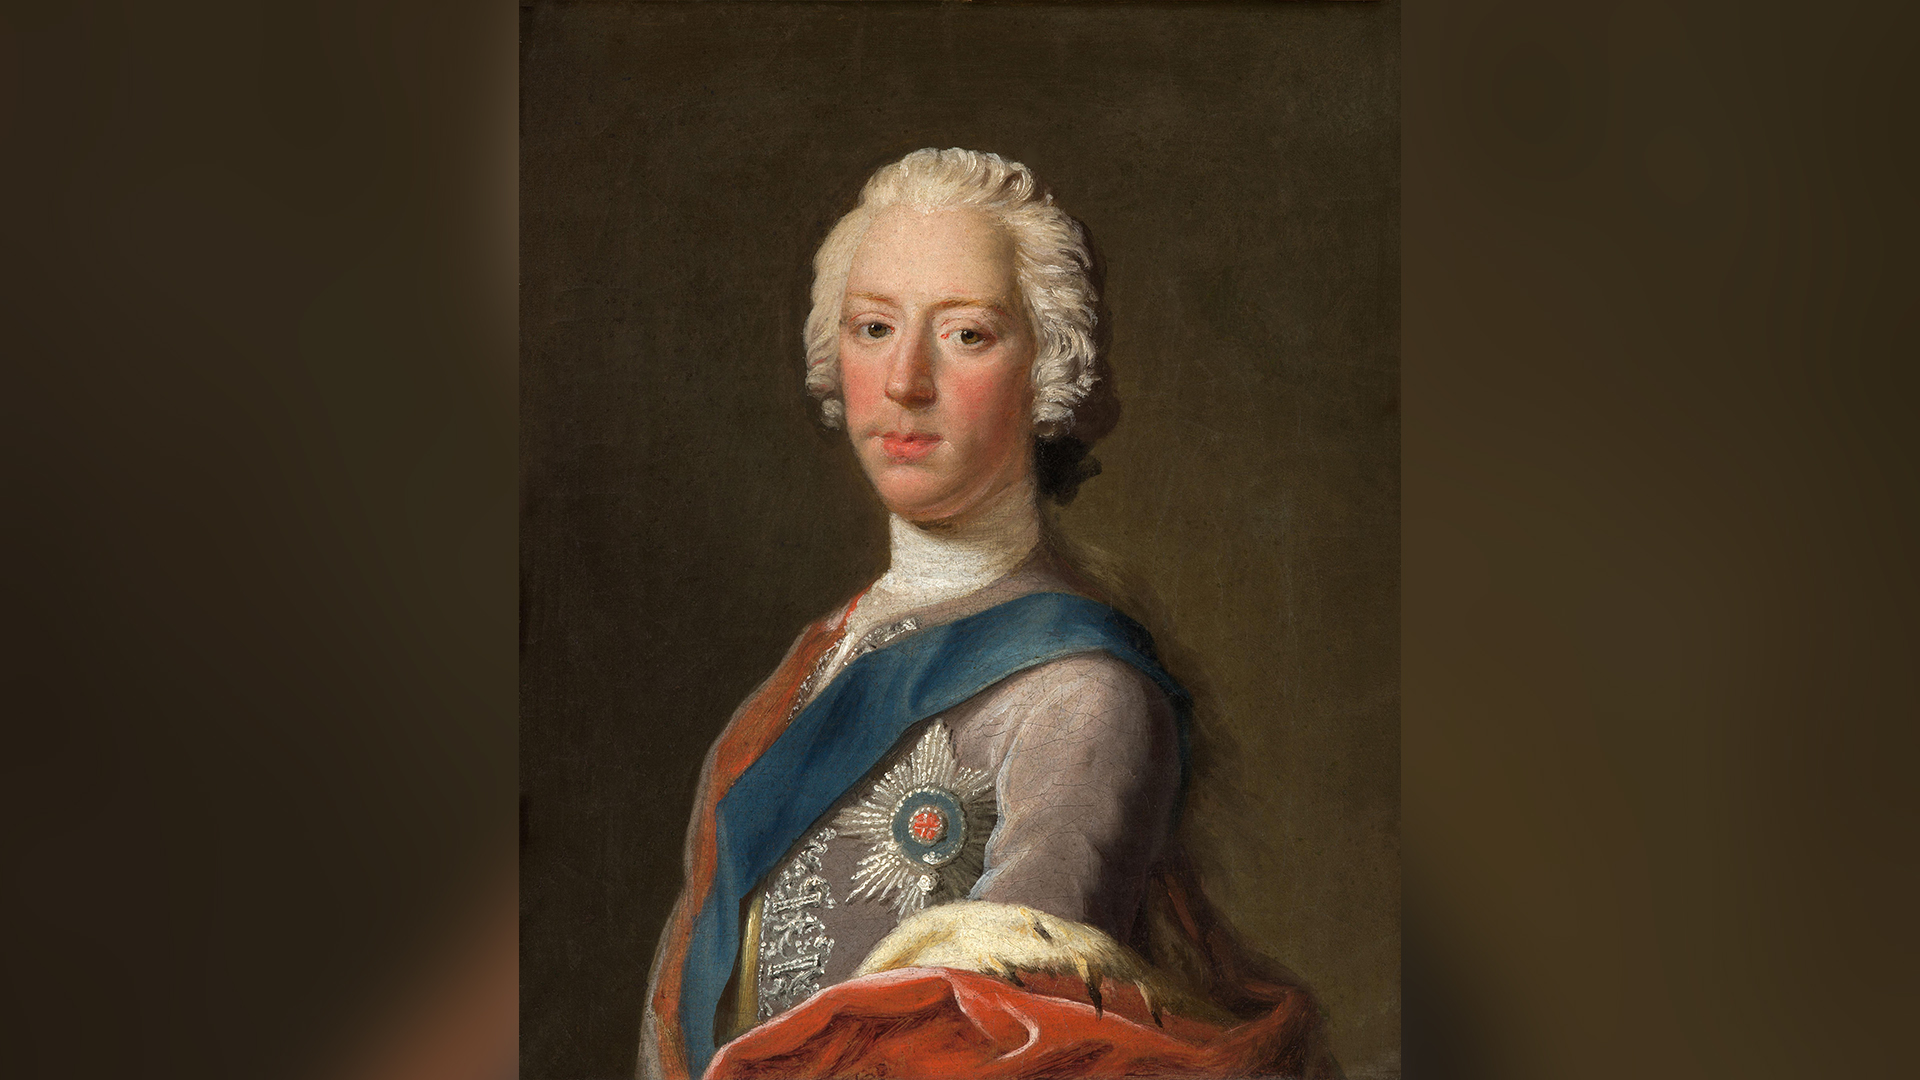 Several contemporary portraits of Charles Edward Stuart exist, including this one painted at about the time of the Jacobite Uprising. It hung in a gloomy corridor of a Scottish mansion for 250 years until it was rediscovered in 2014.